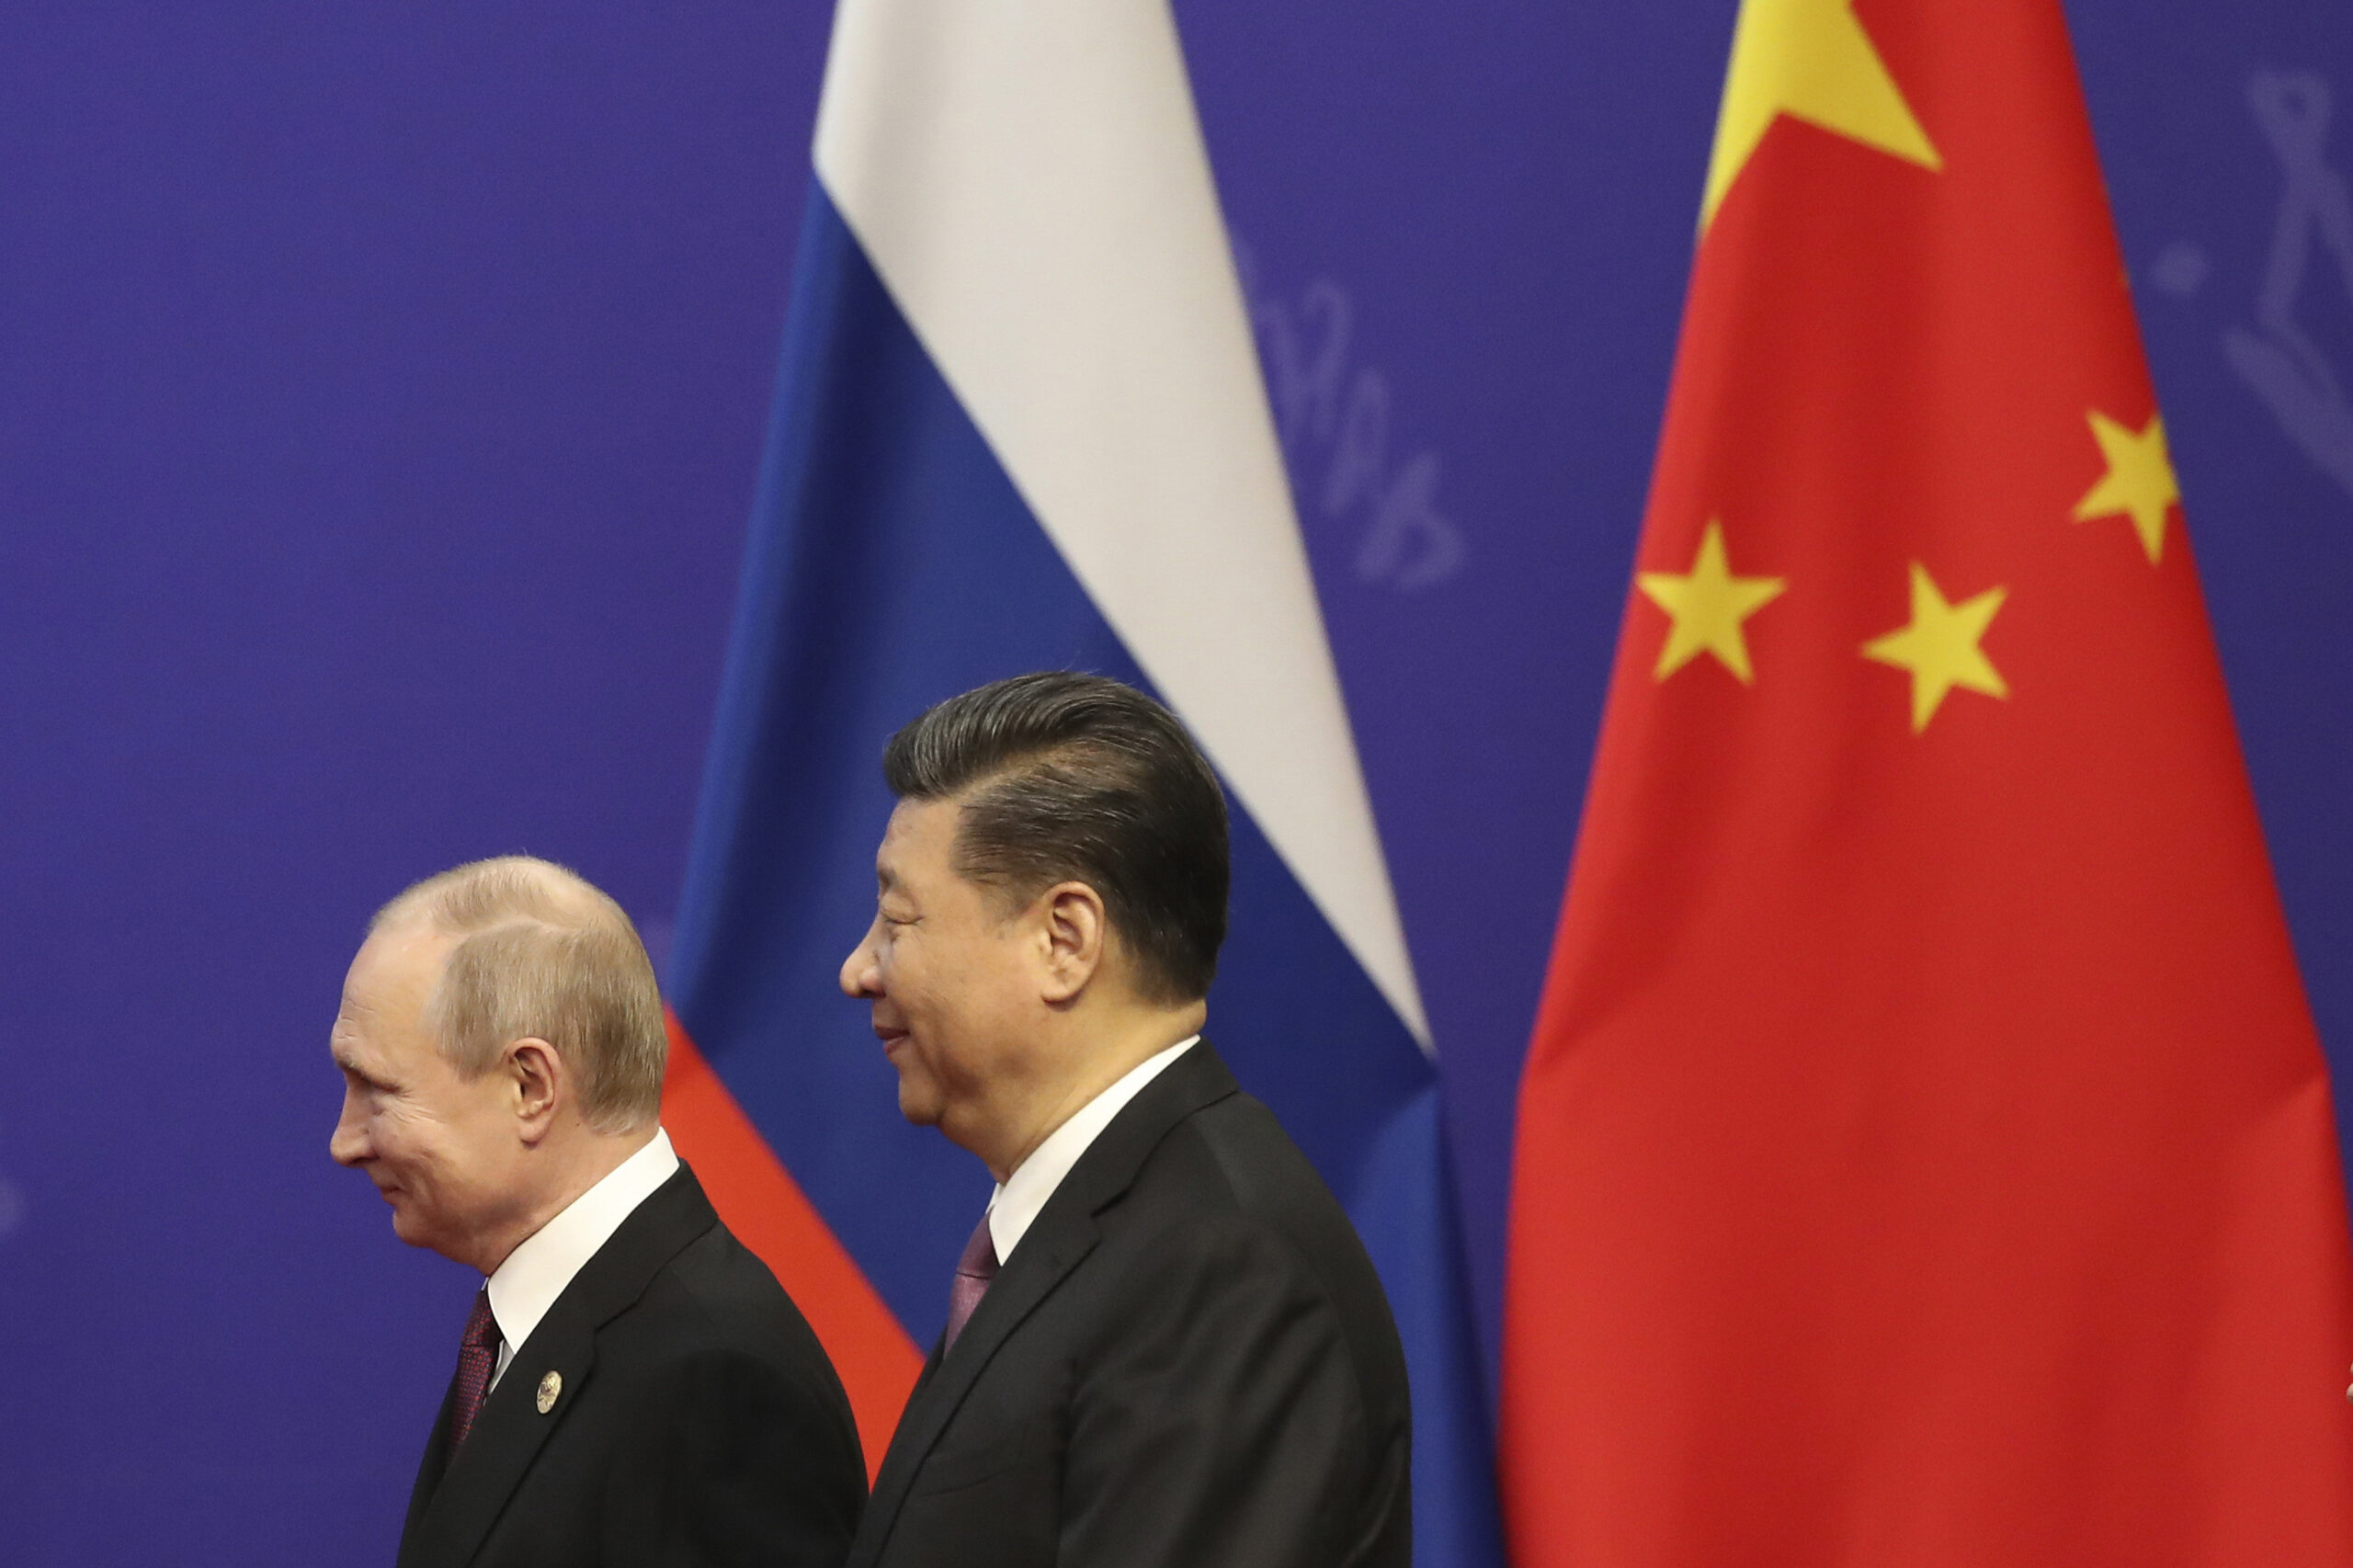 Russian President Vladimir Putin, left, and Chinese President Xi Jinping, right